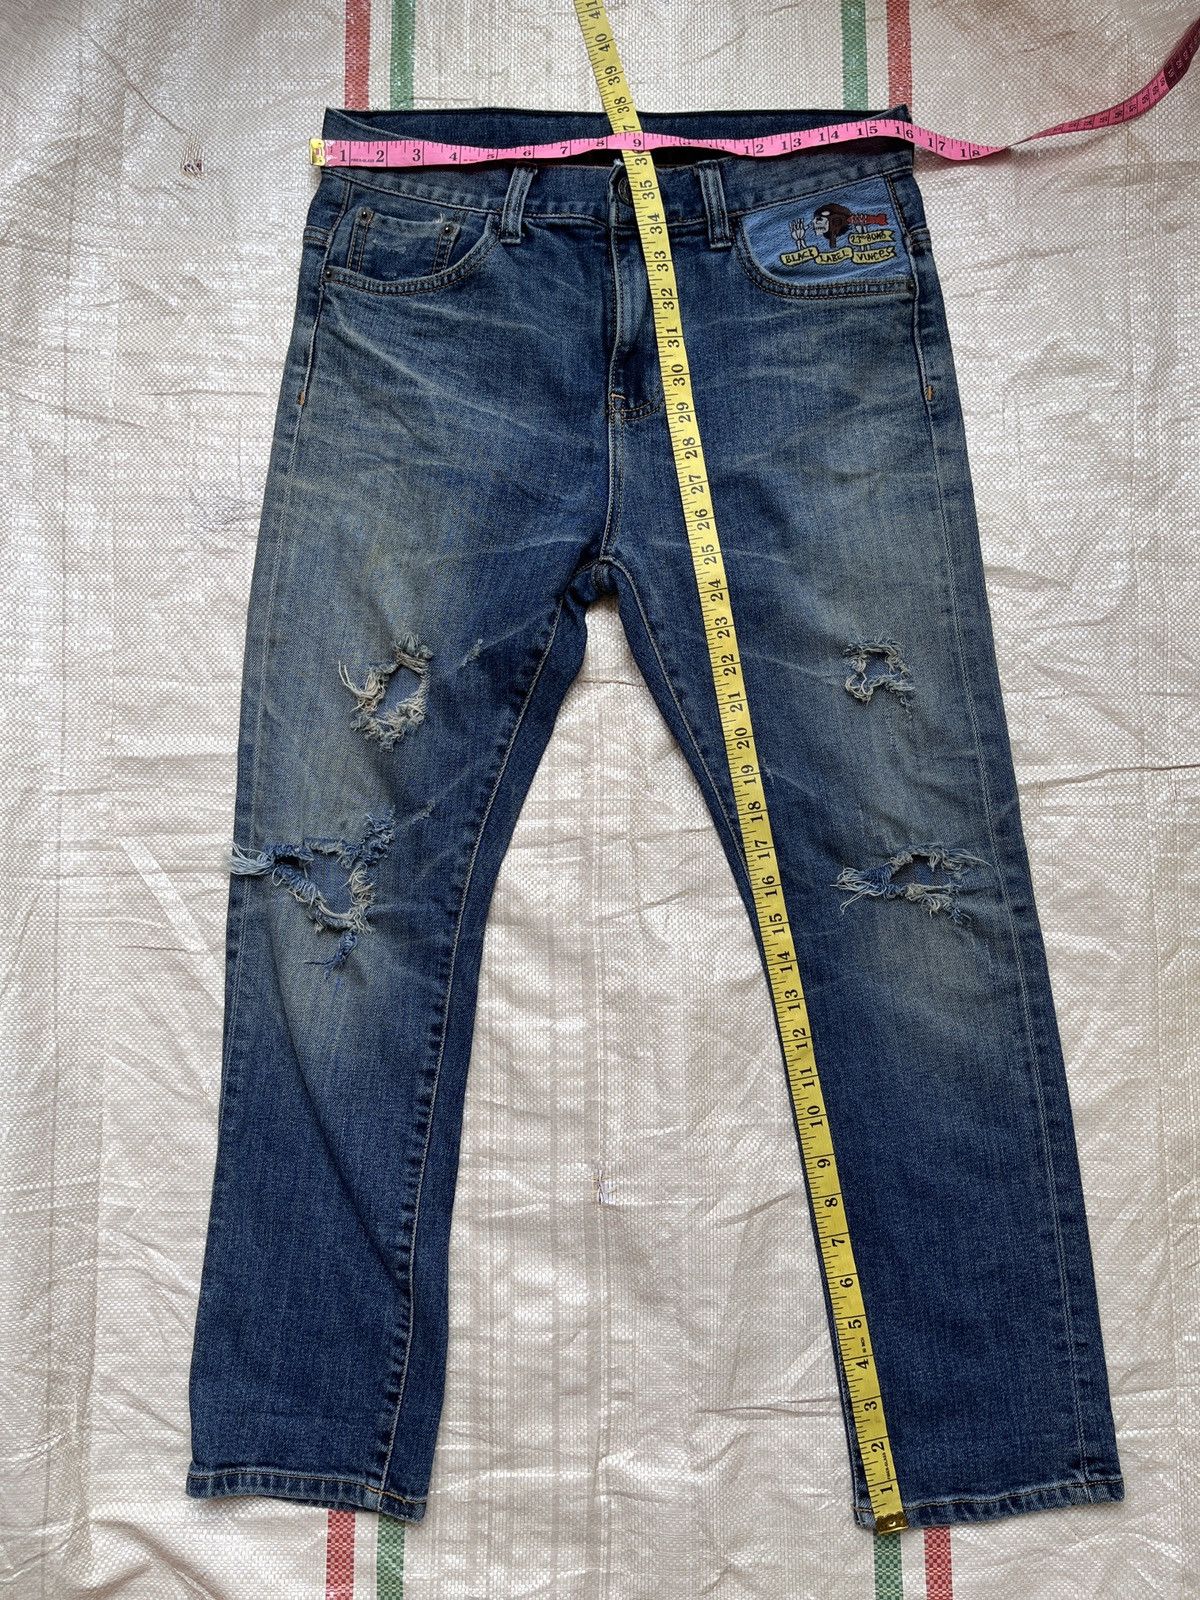 Distressed Denim - Ripped Black Label Denim Jeans With Patches At Pocket - 4